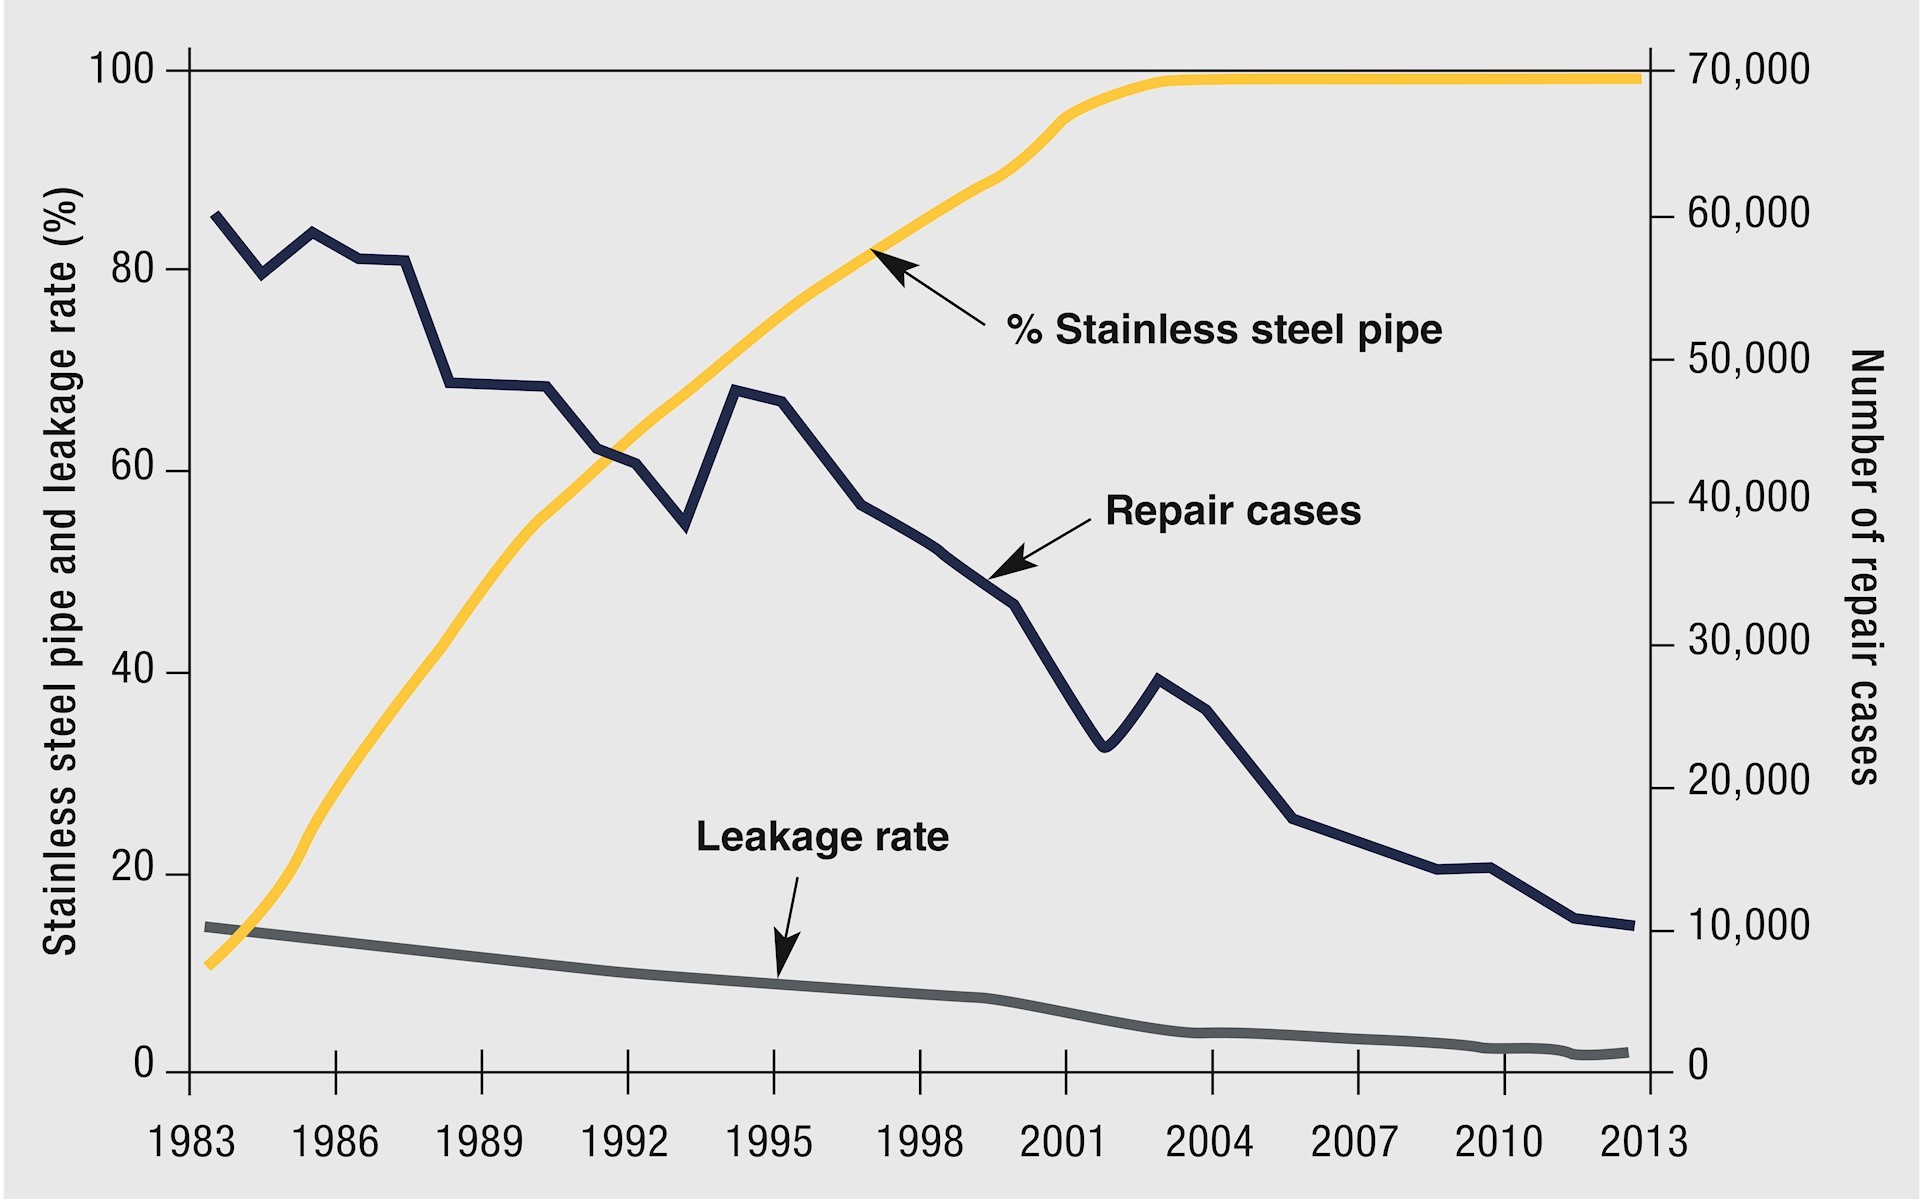 Tokyo reduced leakage rate from 15.3% in 1980 to 2.2% in 2013